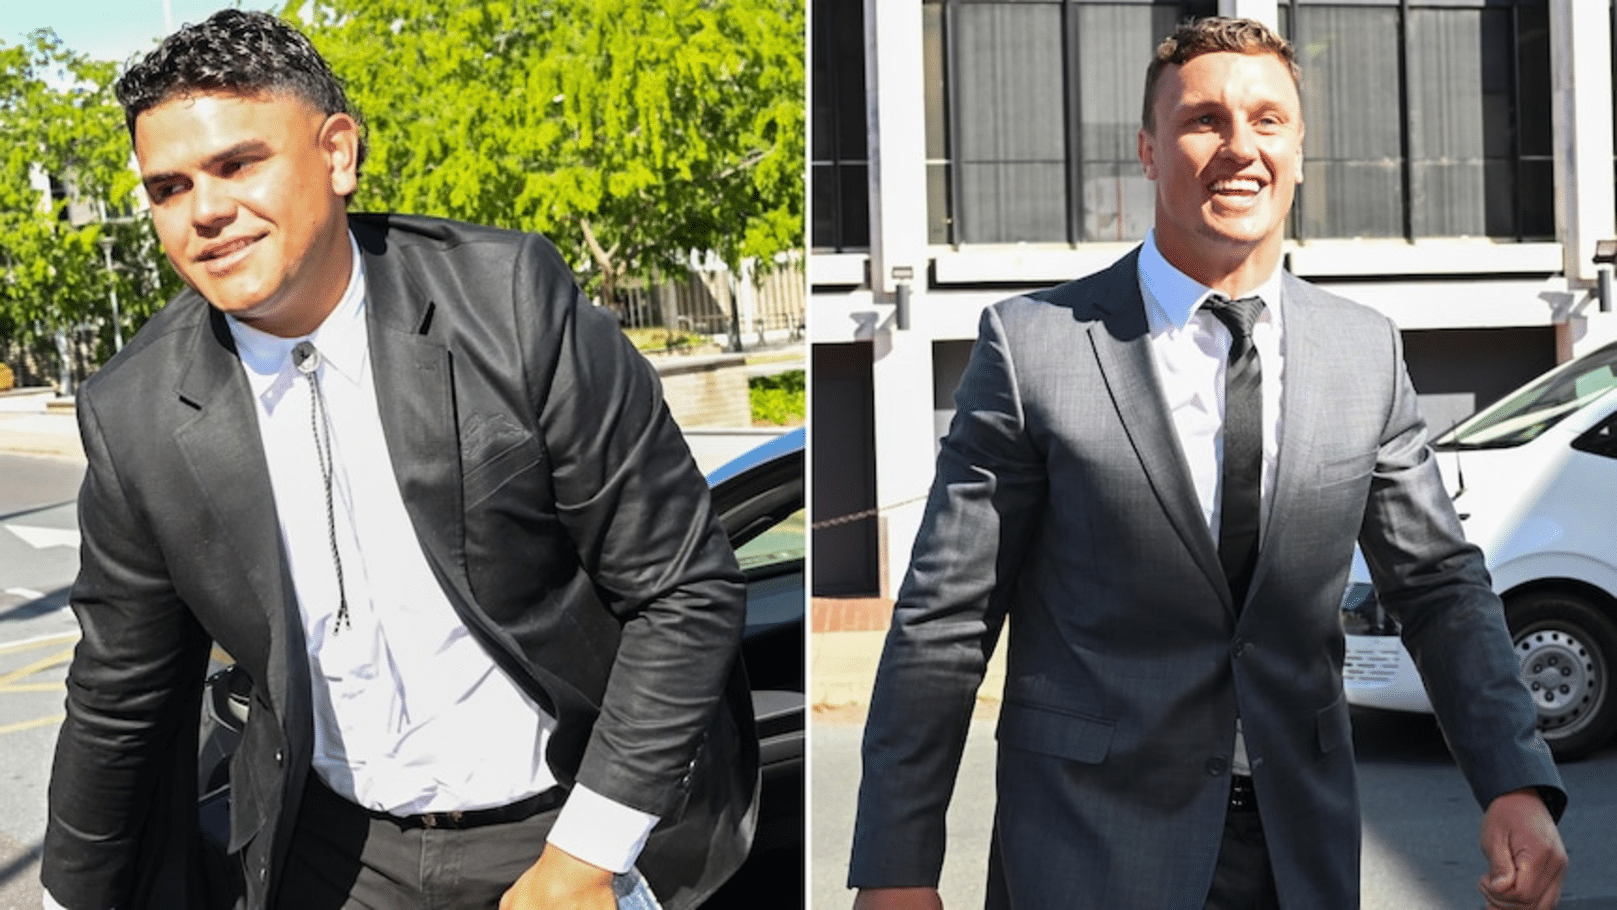 NRL Stars' Lawyers Slam Alleged Fight Charges as Baseless